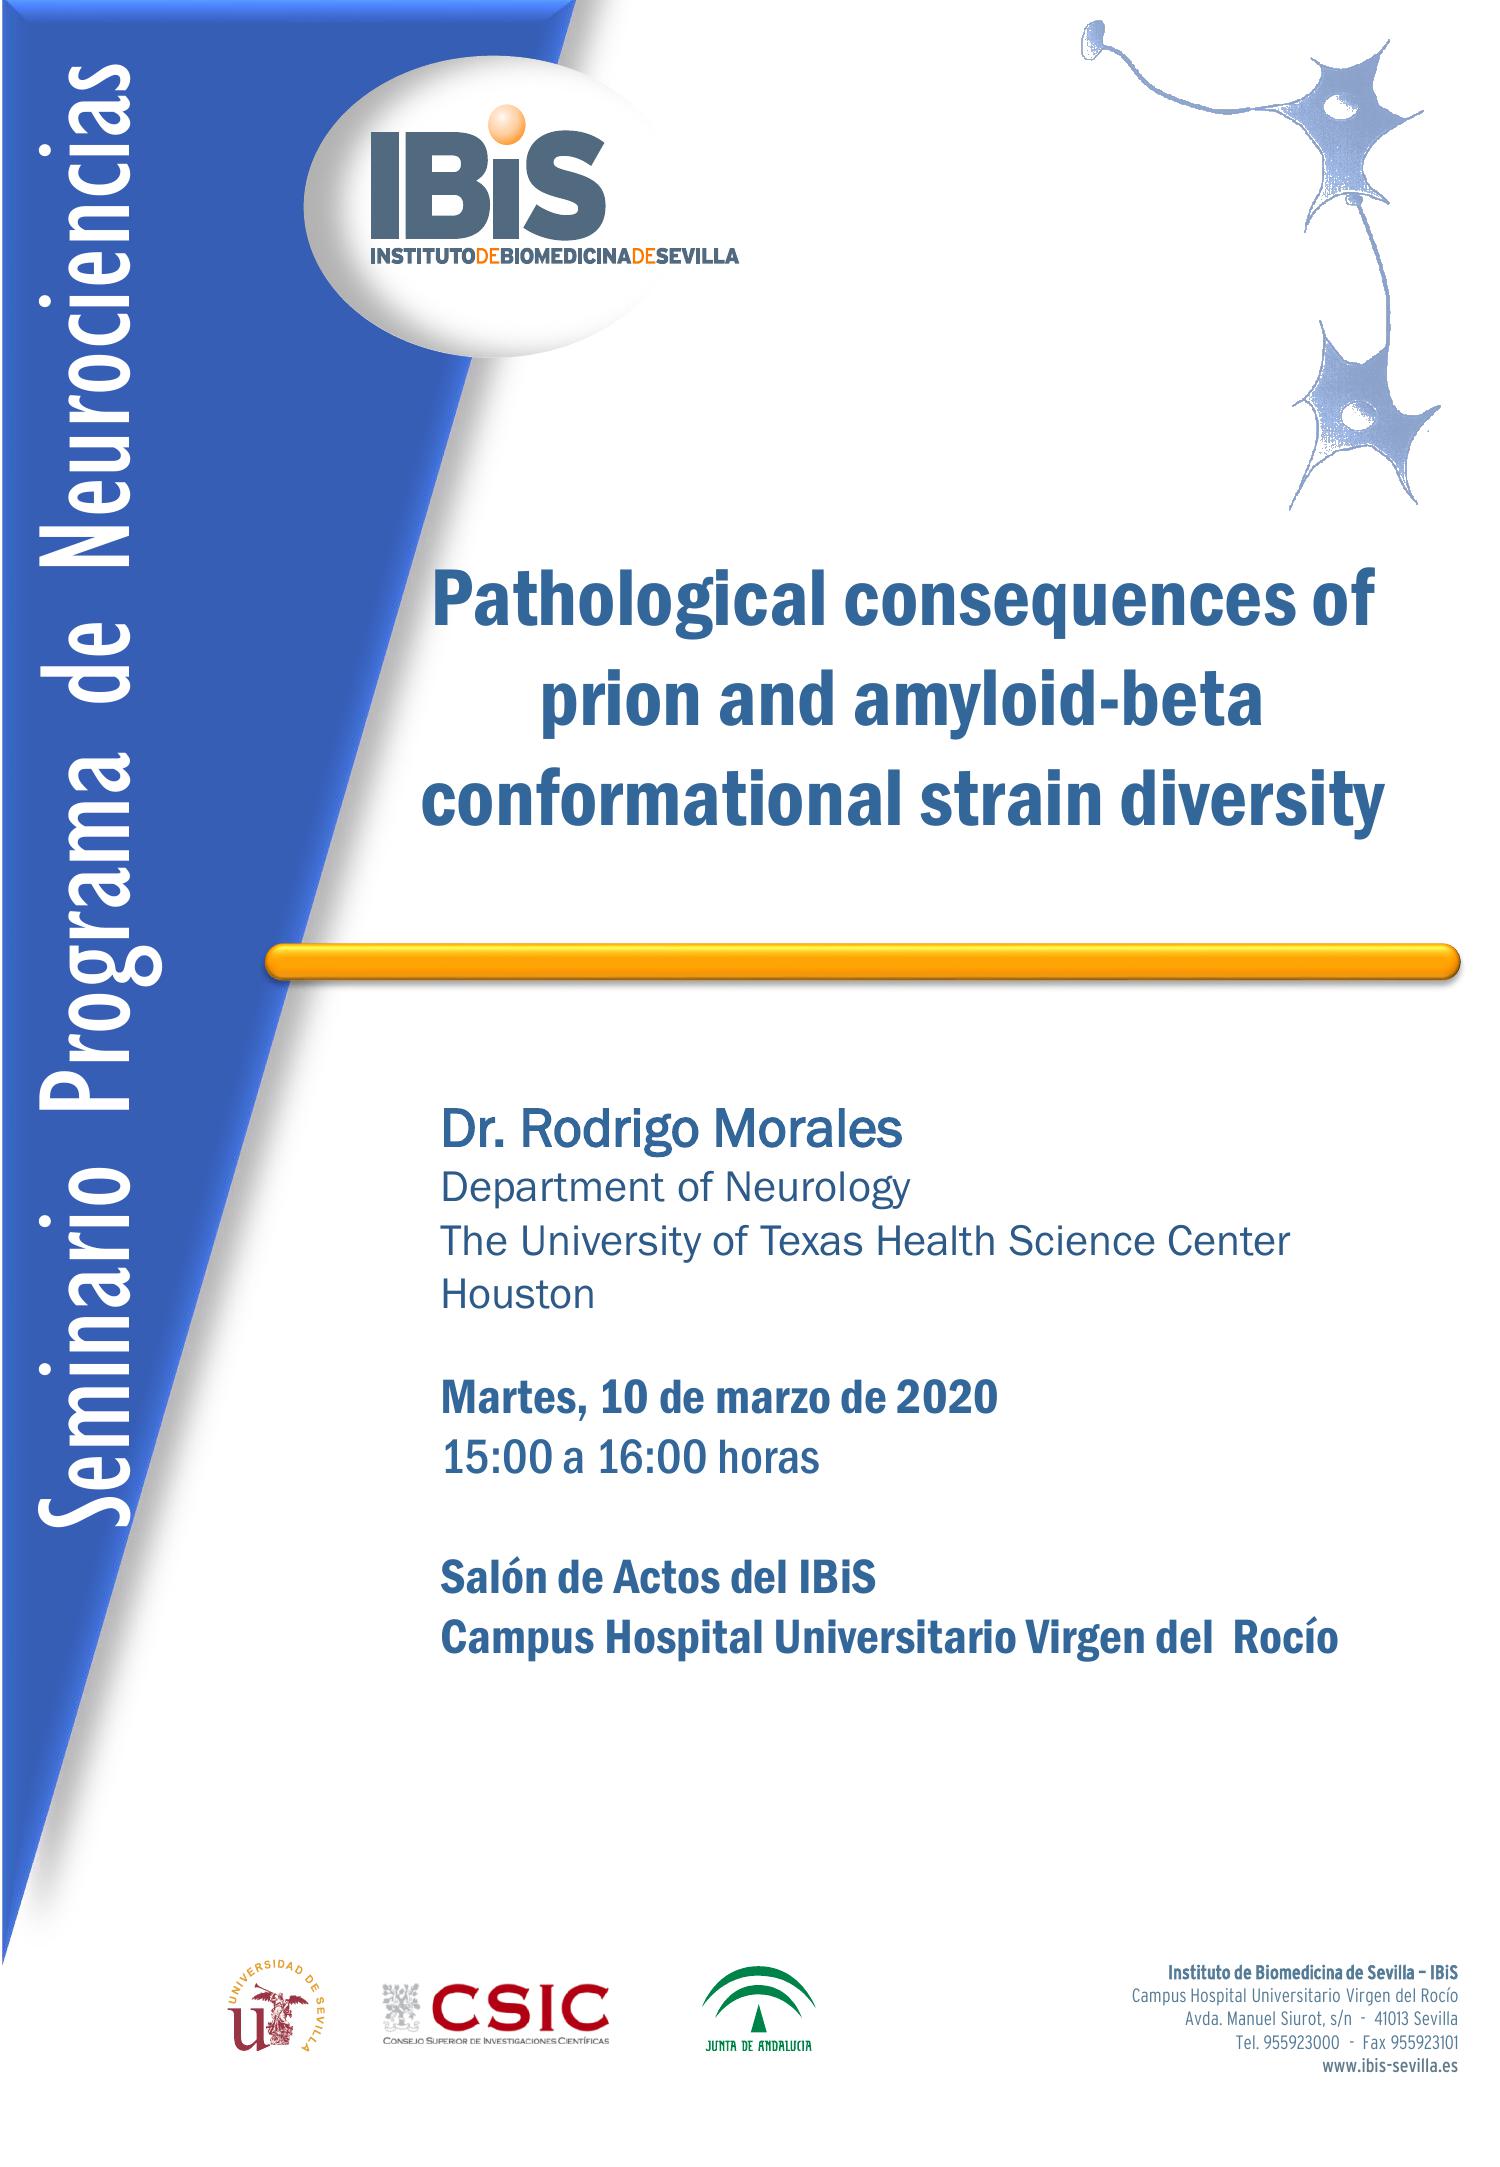 Poster: Pathological consequences of prion and amyloid-beta conformational strain diversity